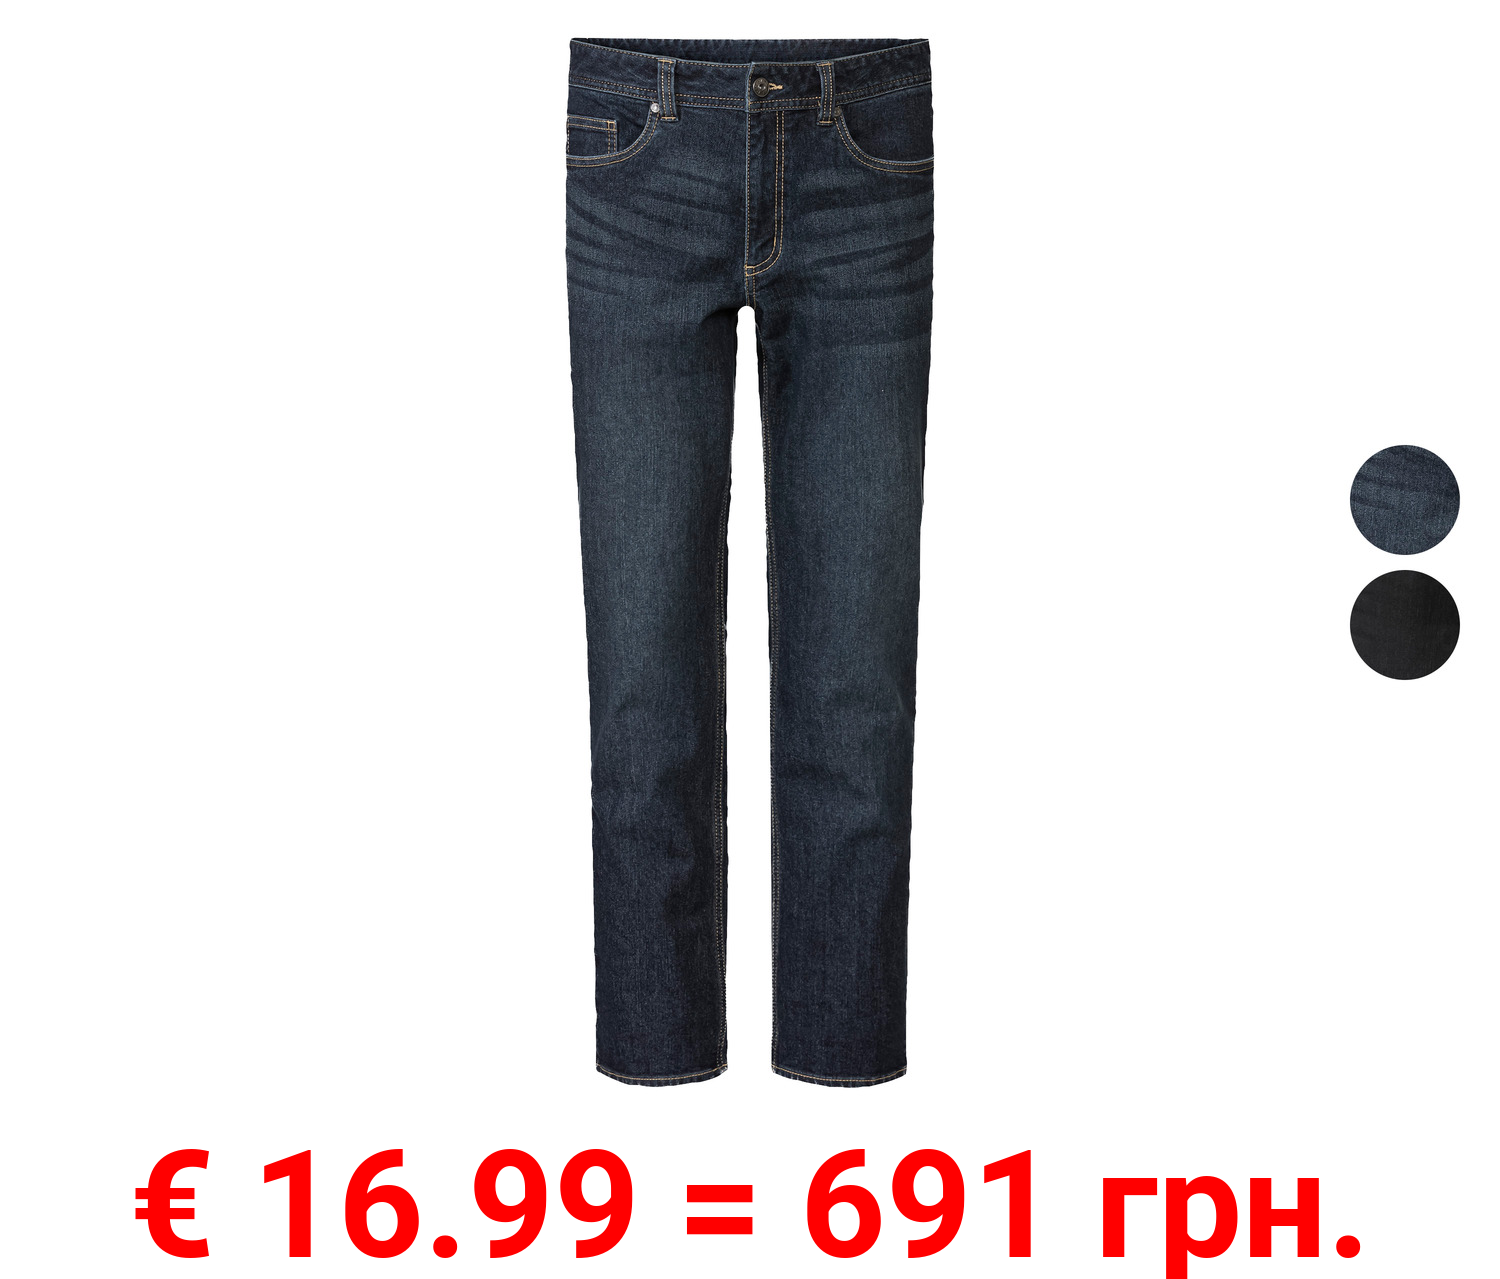 LIVERGY® Herren Thermojeans, Straight Fit, normale Leibhöhe